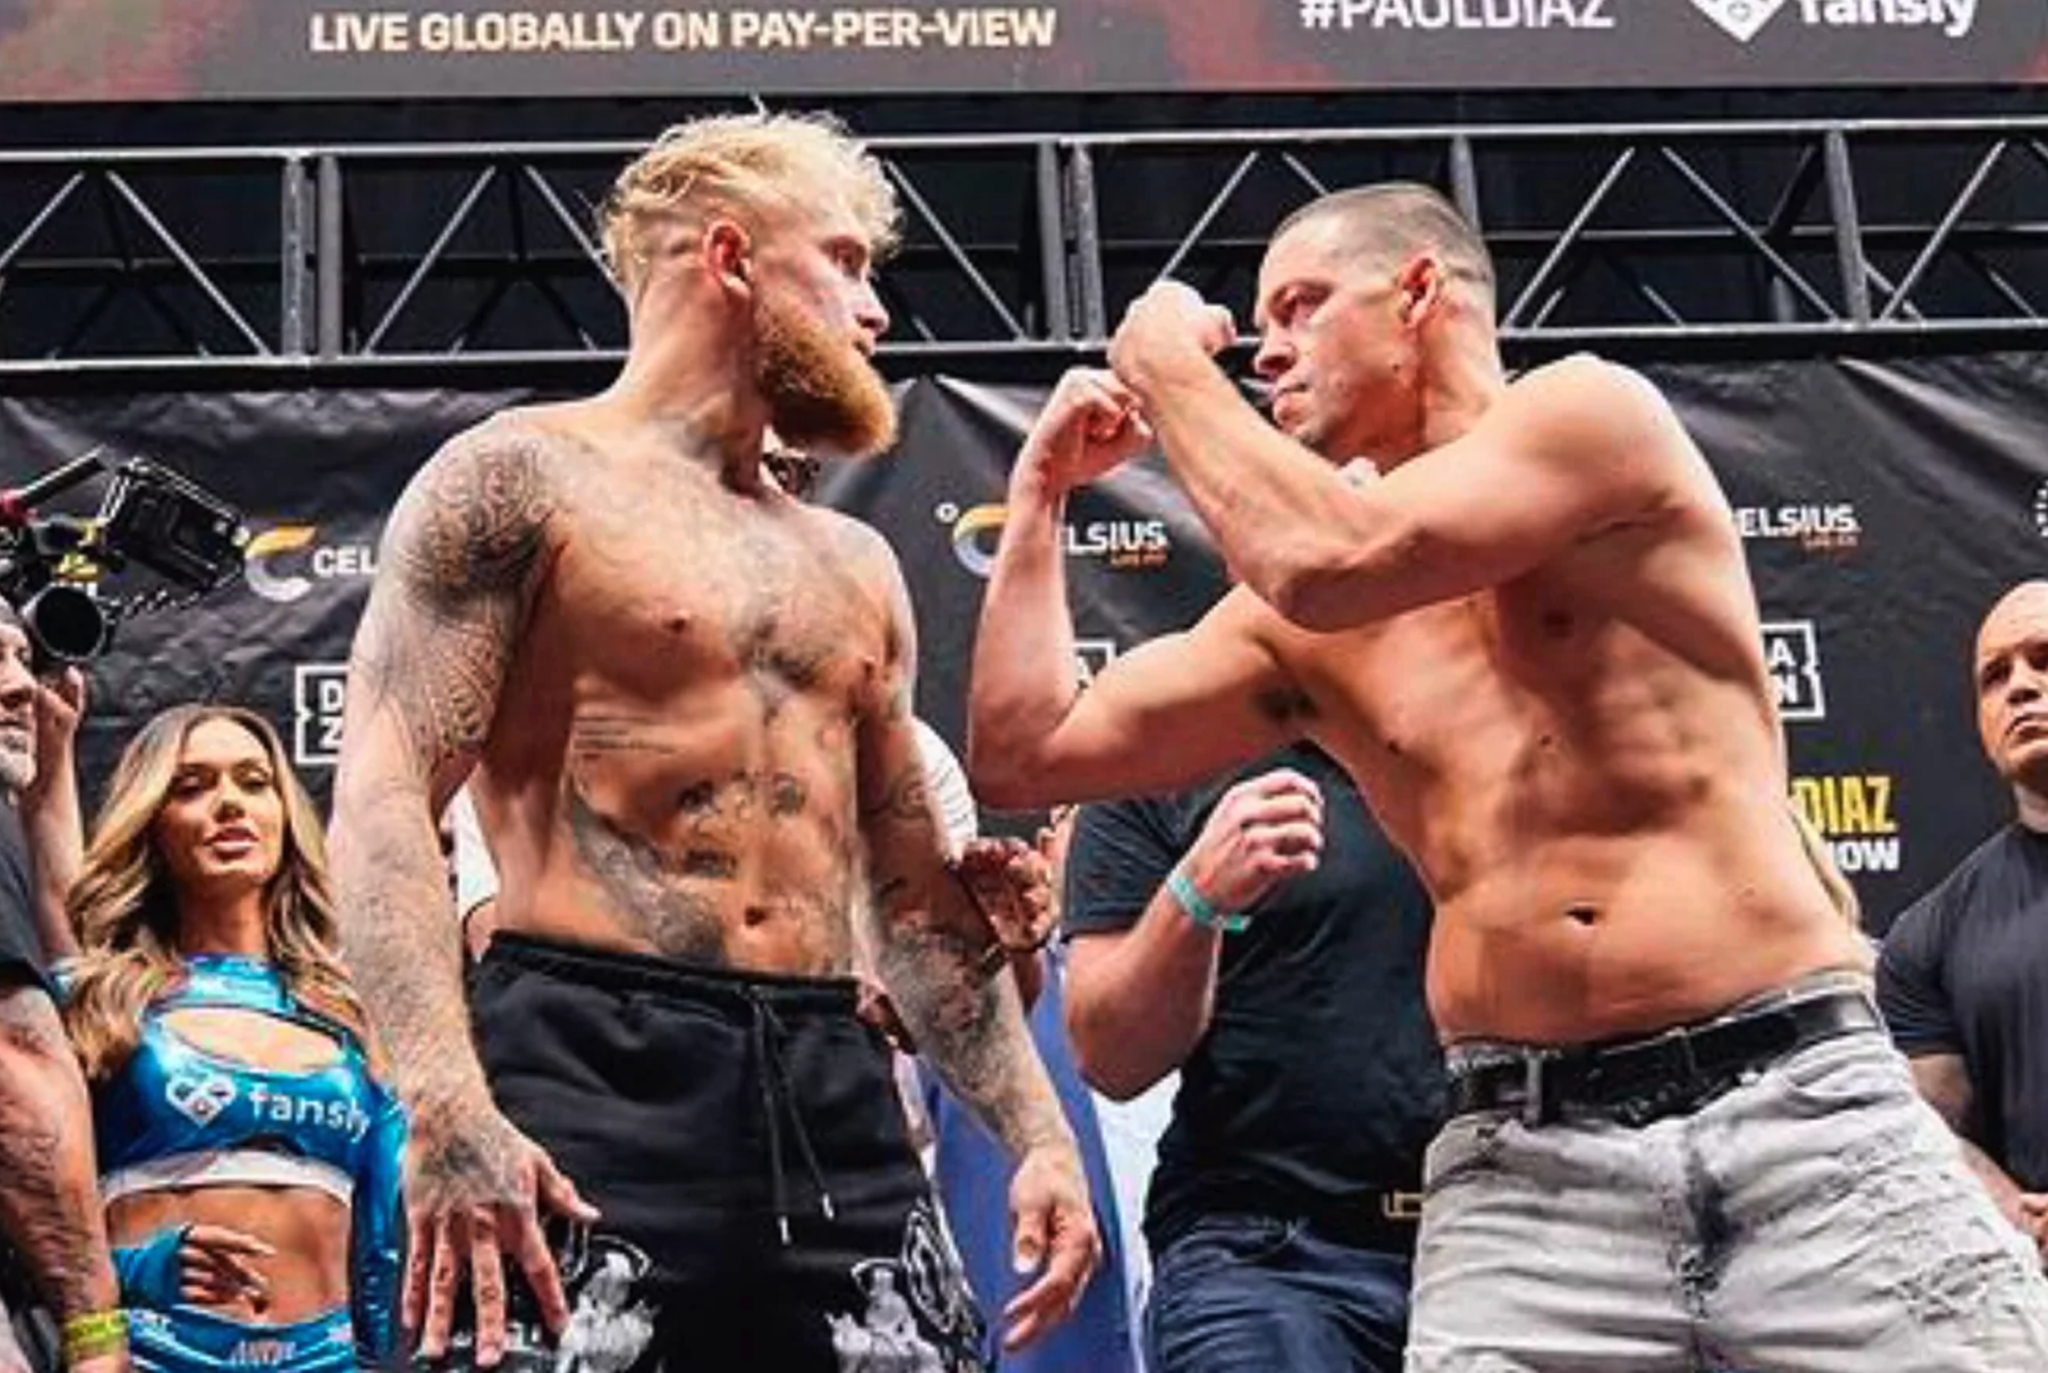 Jake Paul vs Nate Diaz PPV: How much does it cost to watch todays fight?